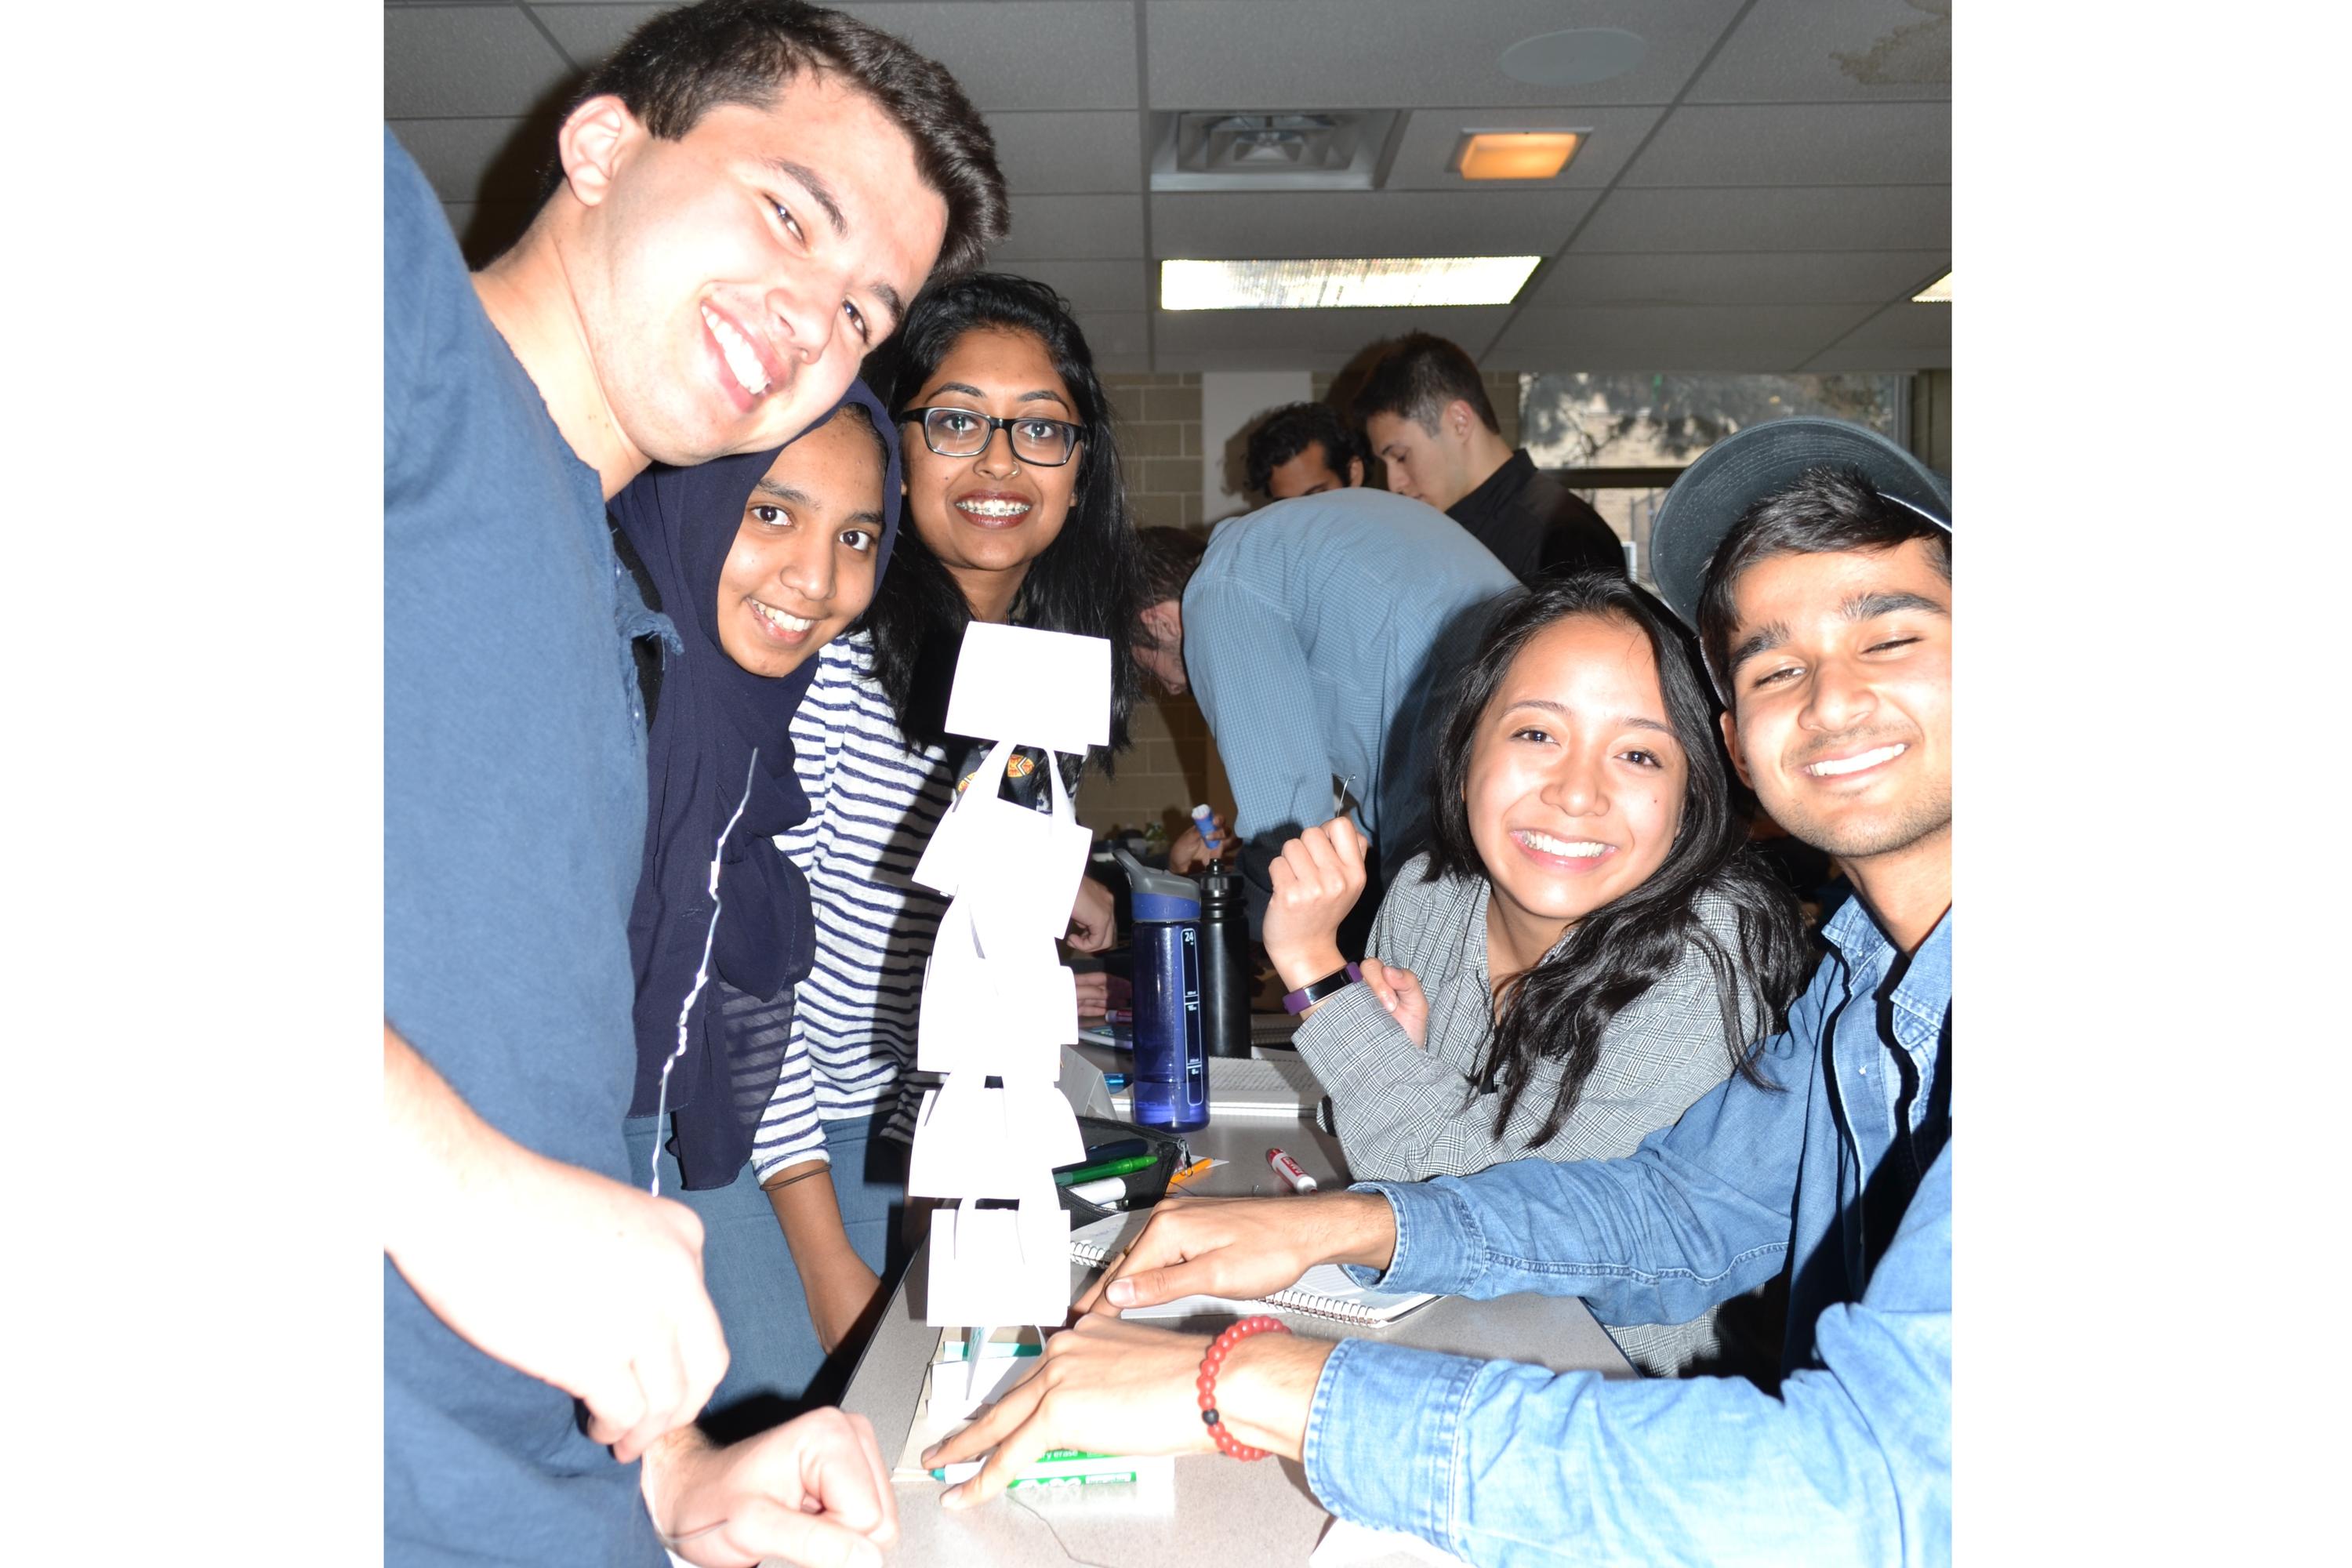 Management Engineering students Yusuf Khaled, Sana Irfan, Sathana Srikanthan, Samantha Villaluz, and Aditya Kalia show off the paper tower they built in one of the class activities in MSCI 211